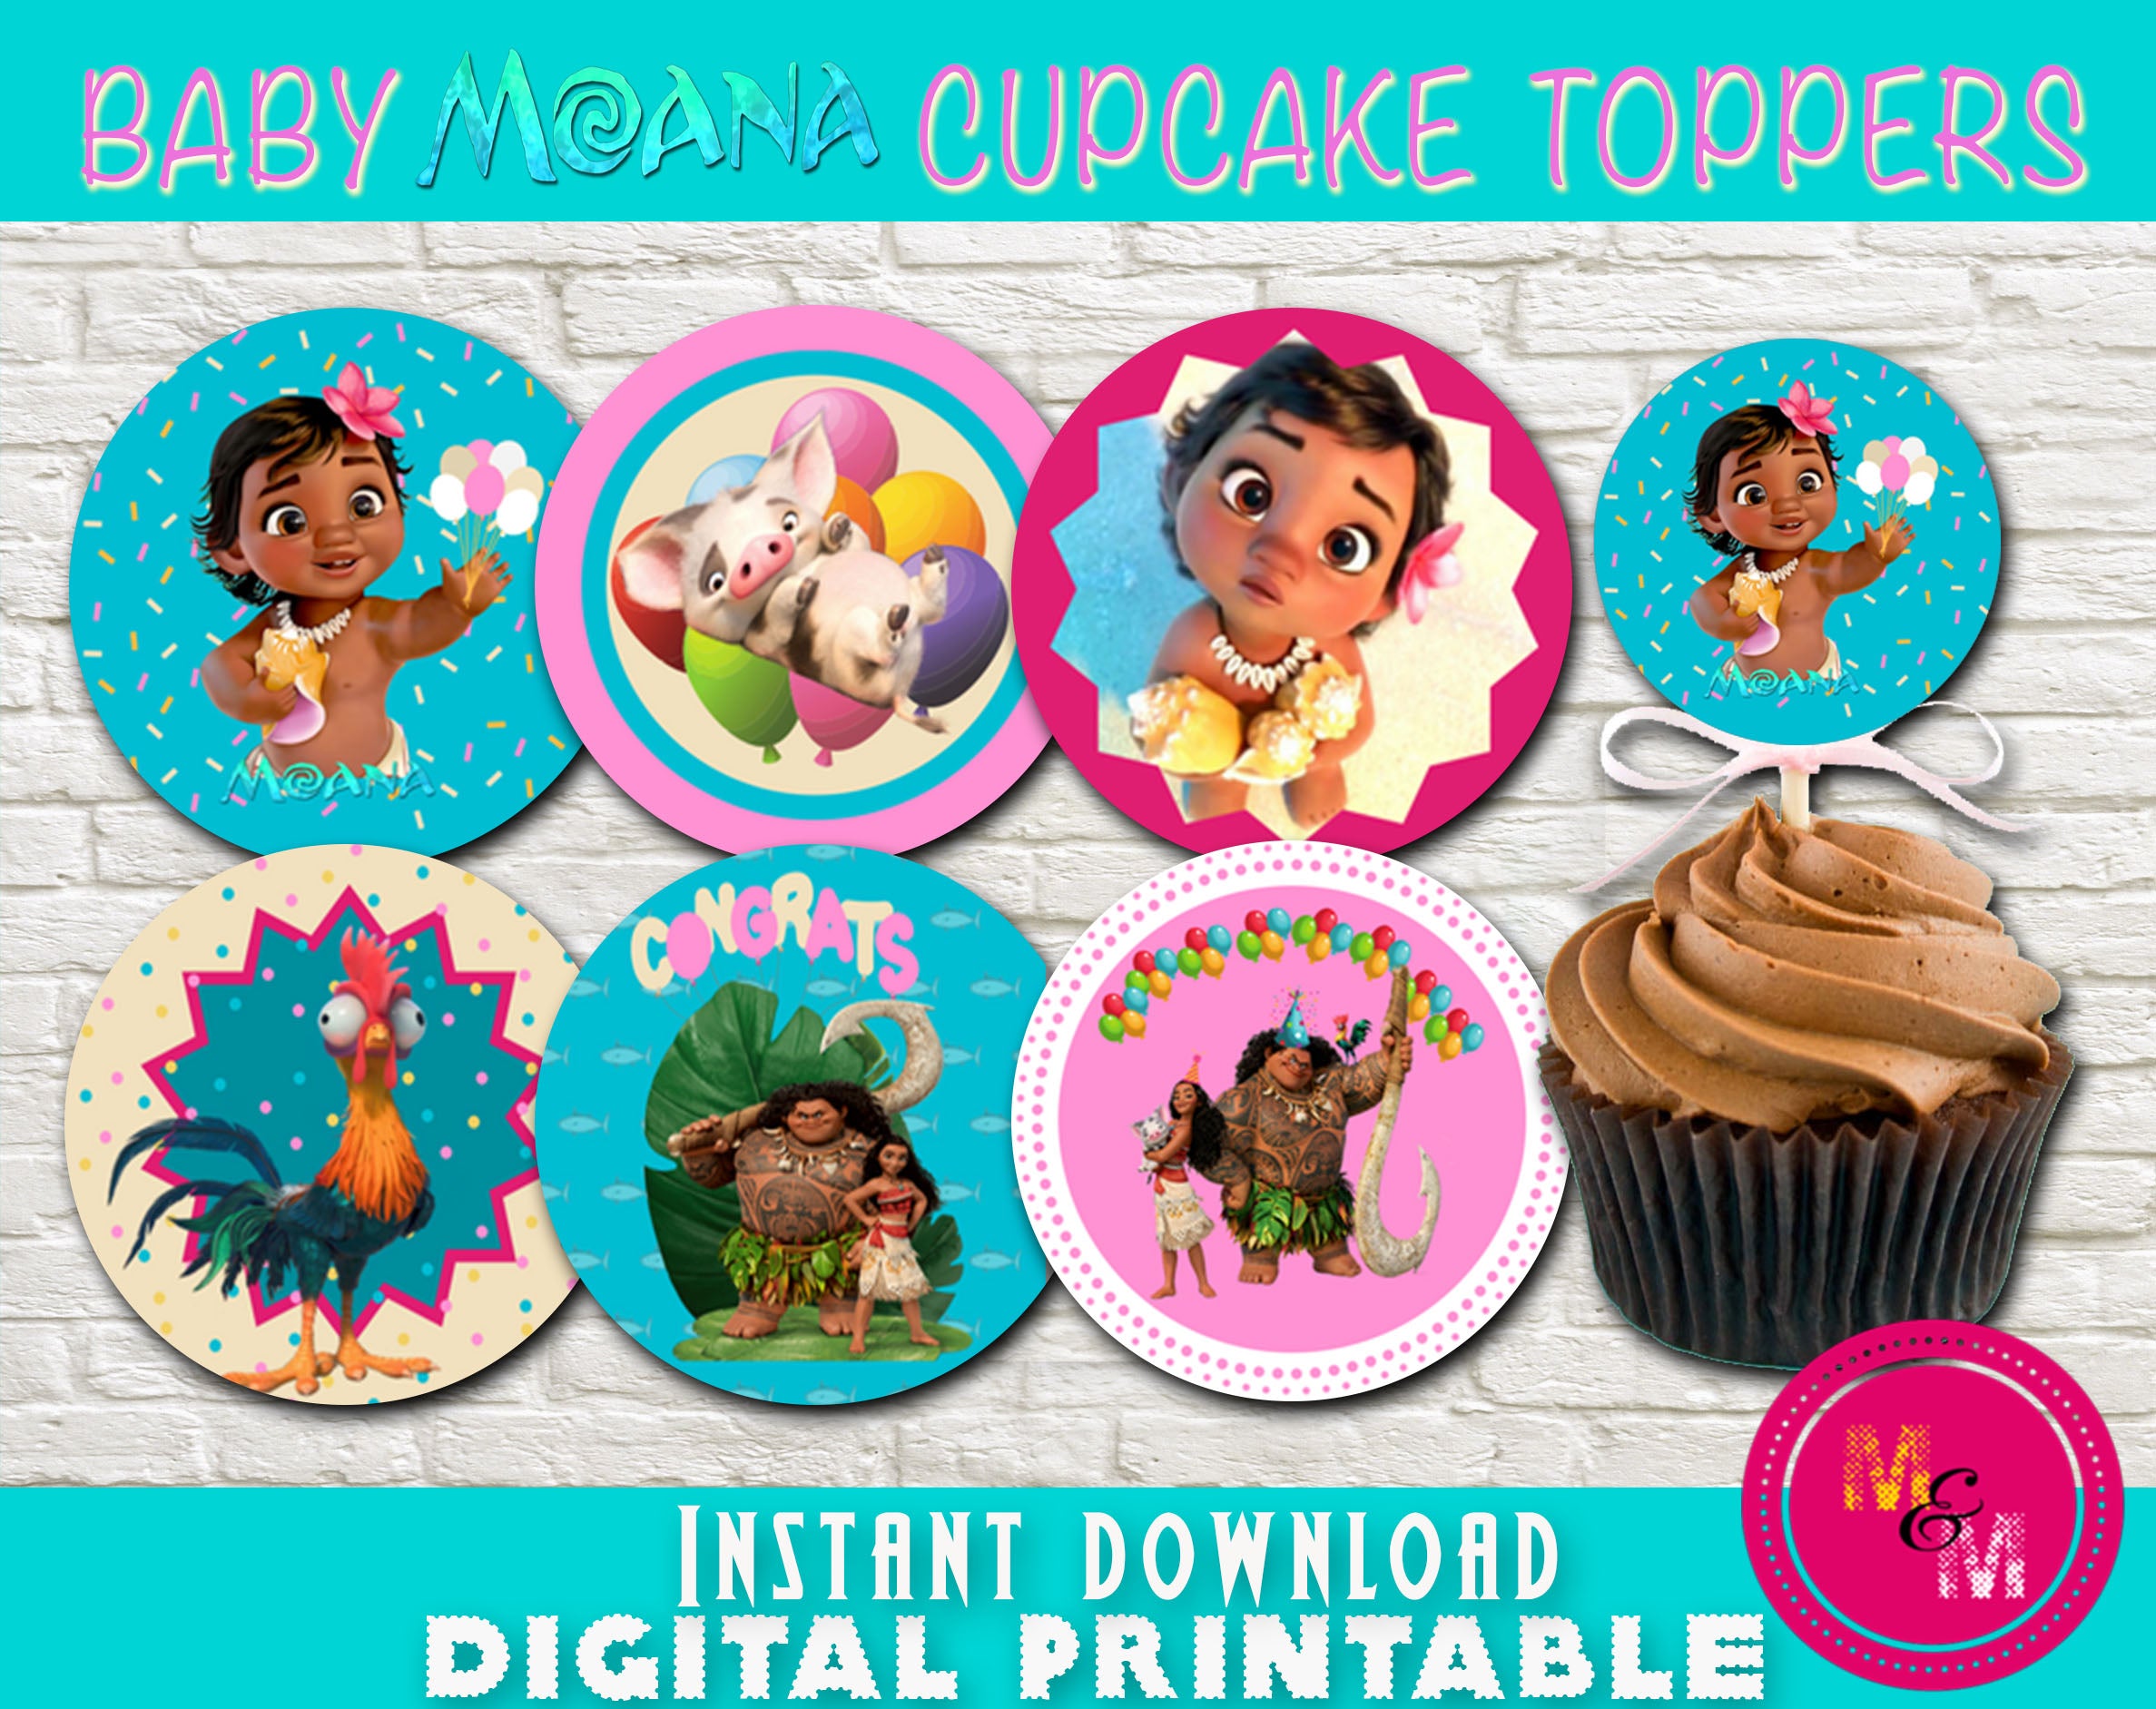 Printable Digital Moana Party Moana Toppers Moana Cupcake Toppers Moana Birthday Instant Dl Moana s Paper Paper Party Supplies Kromasol Com